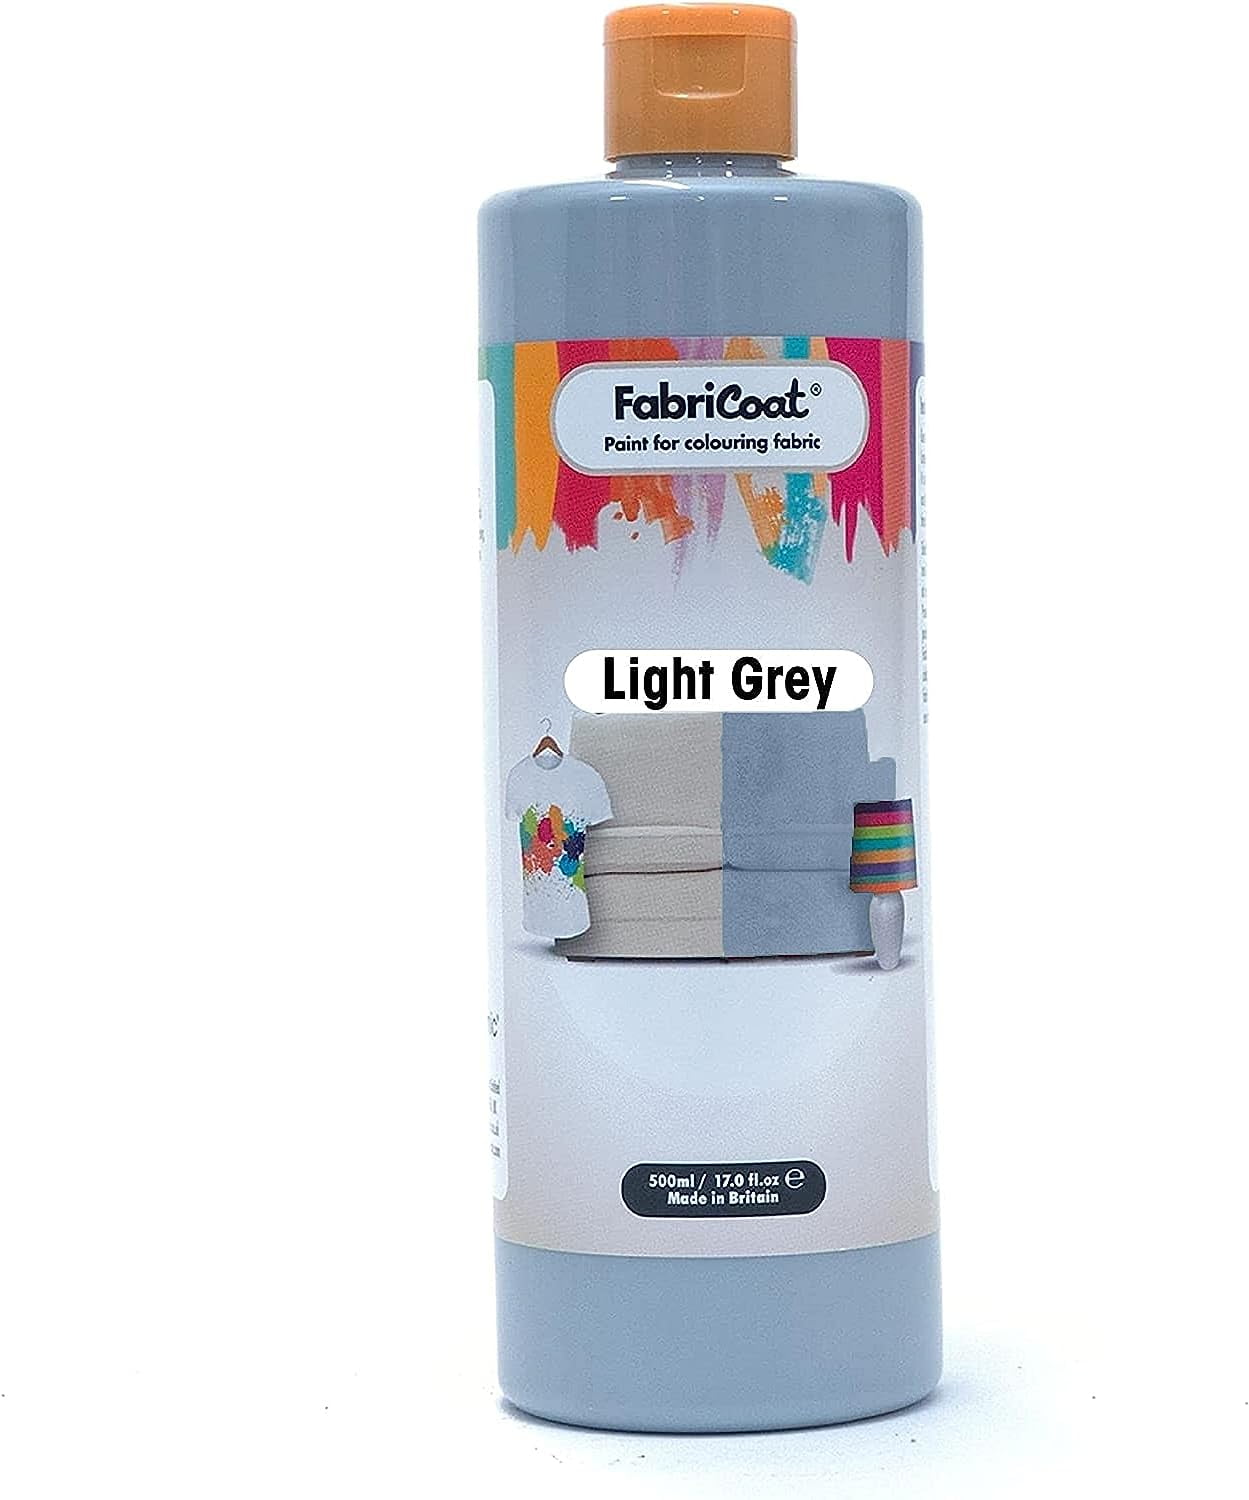 White Fabric Paint/Dye. For clothes, upholstery, furniture, car